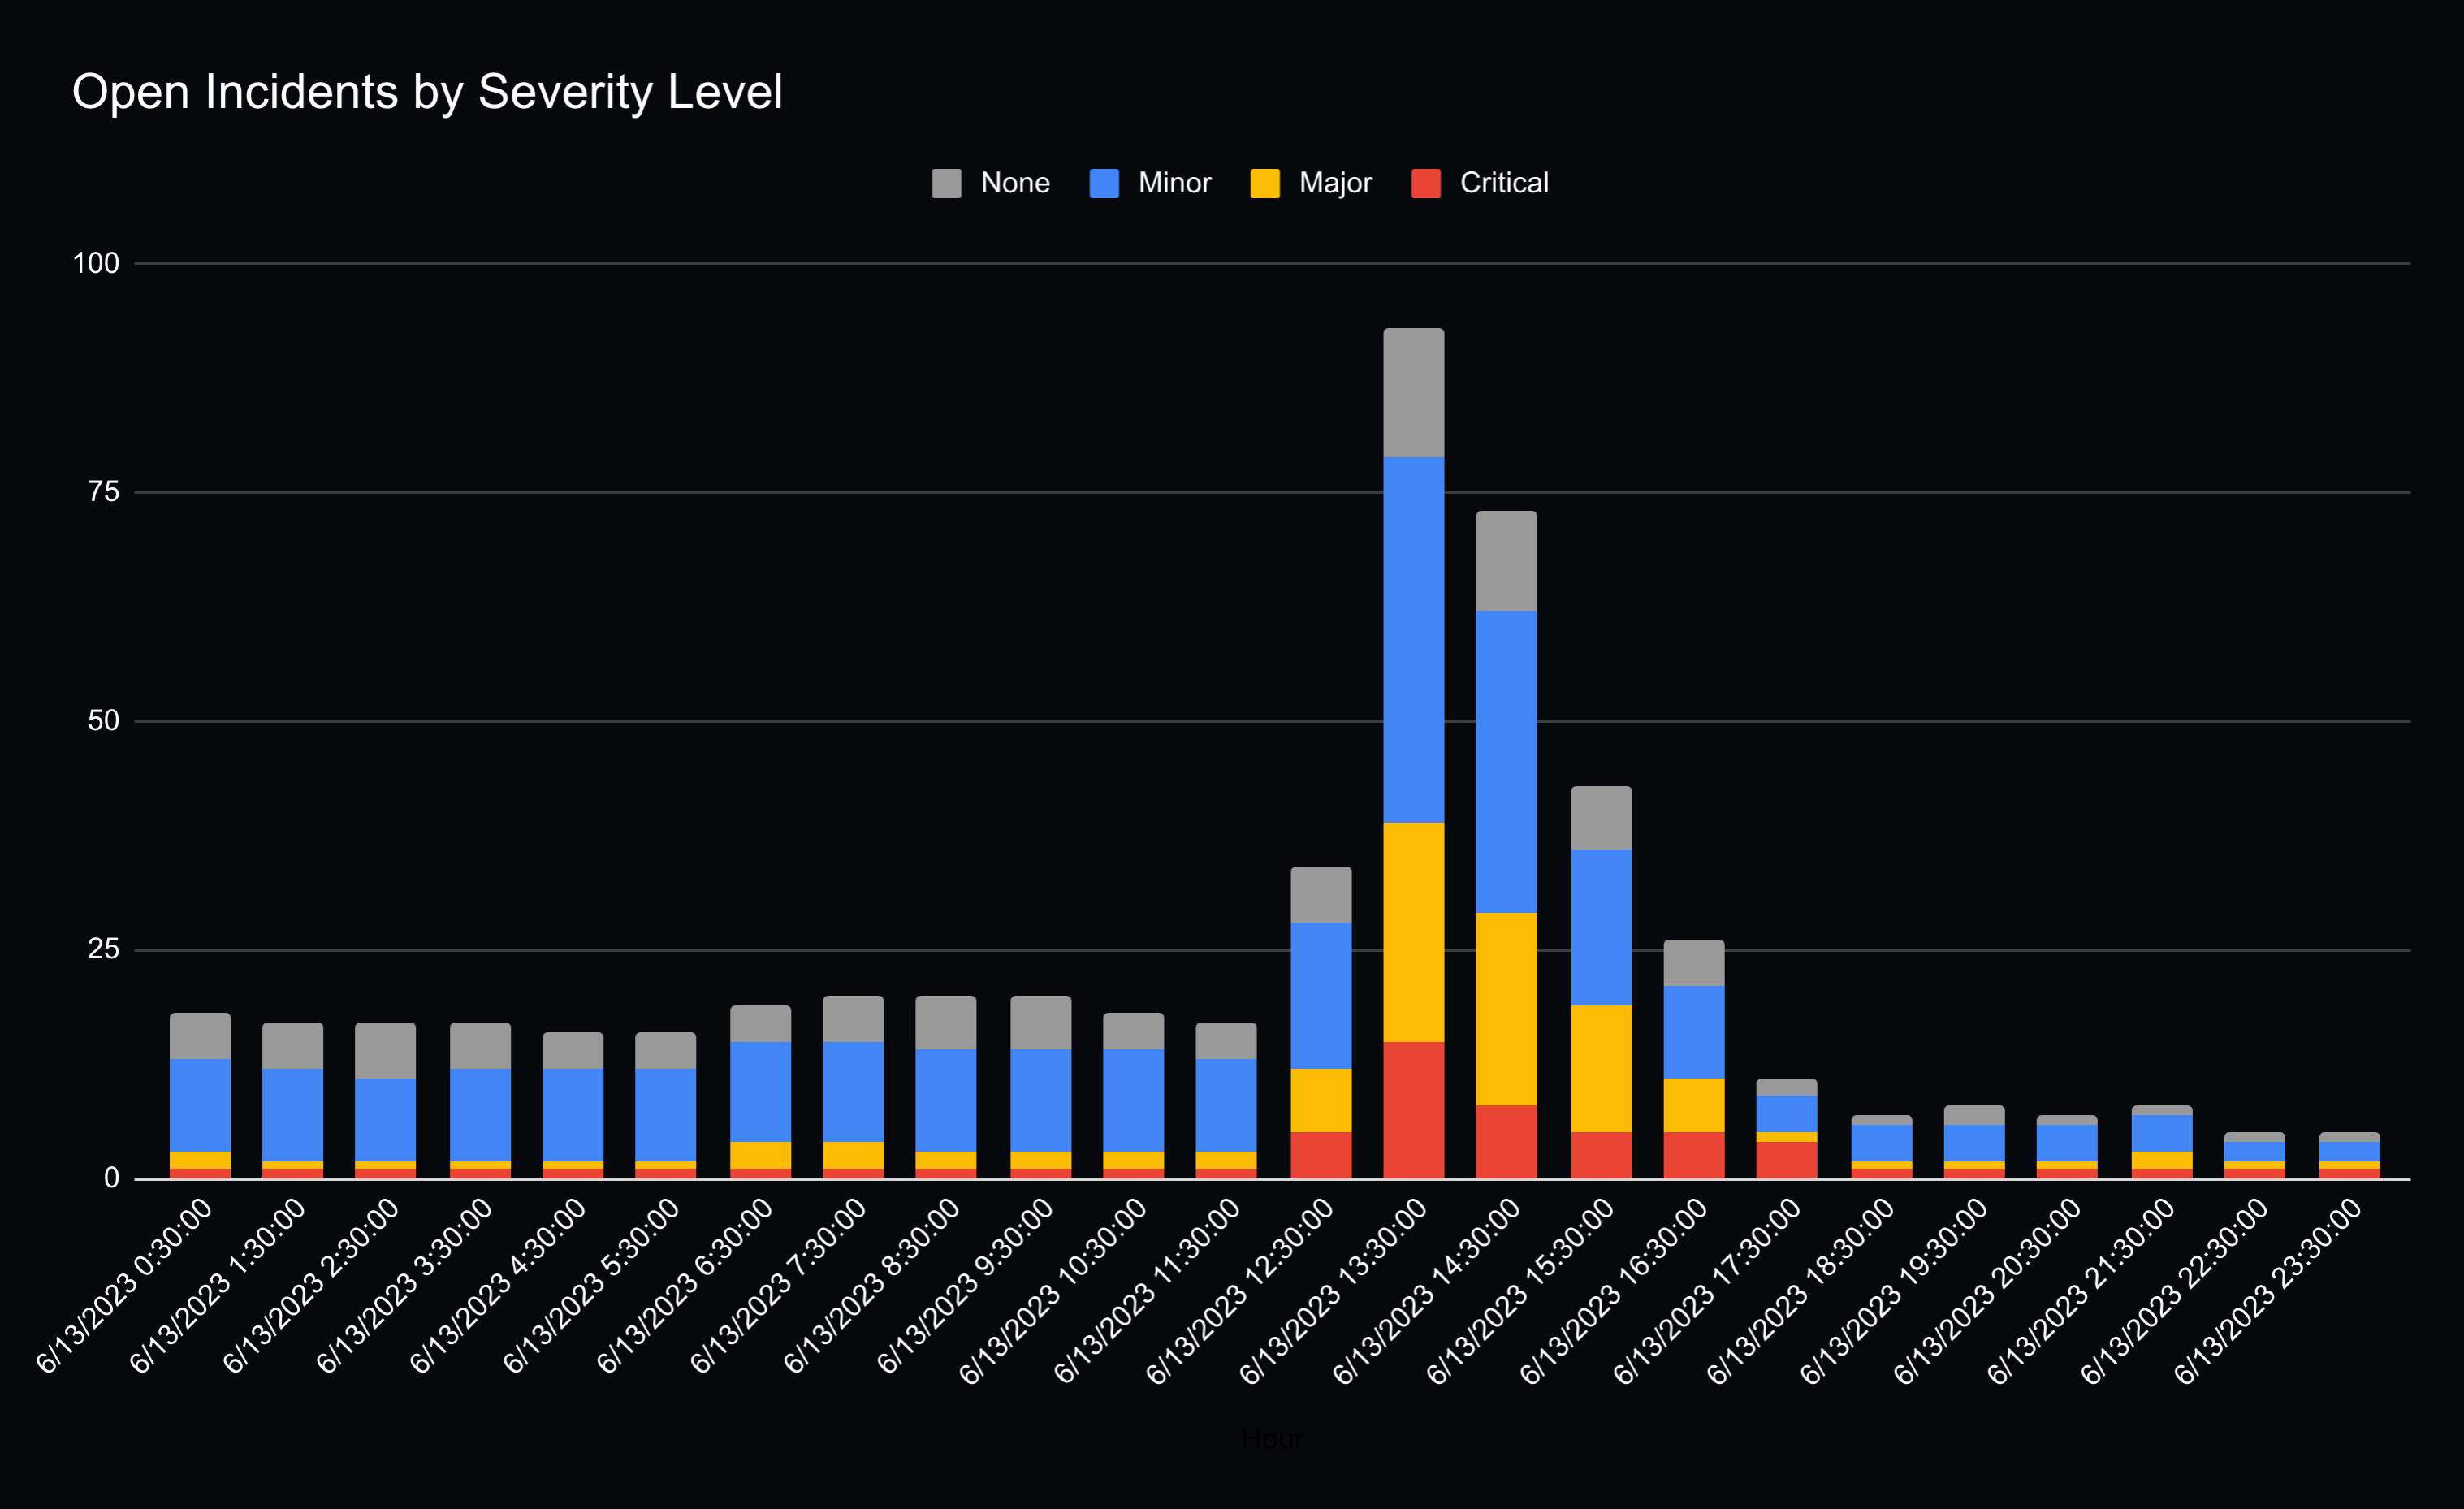 Number of Open Incidents by Severity Levels